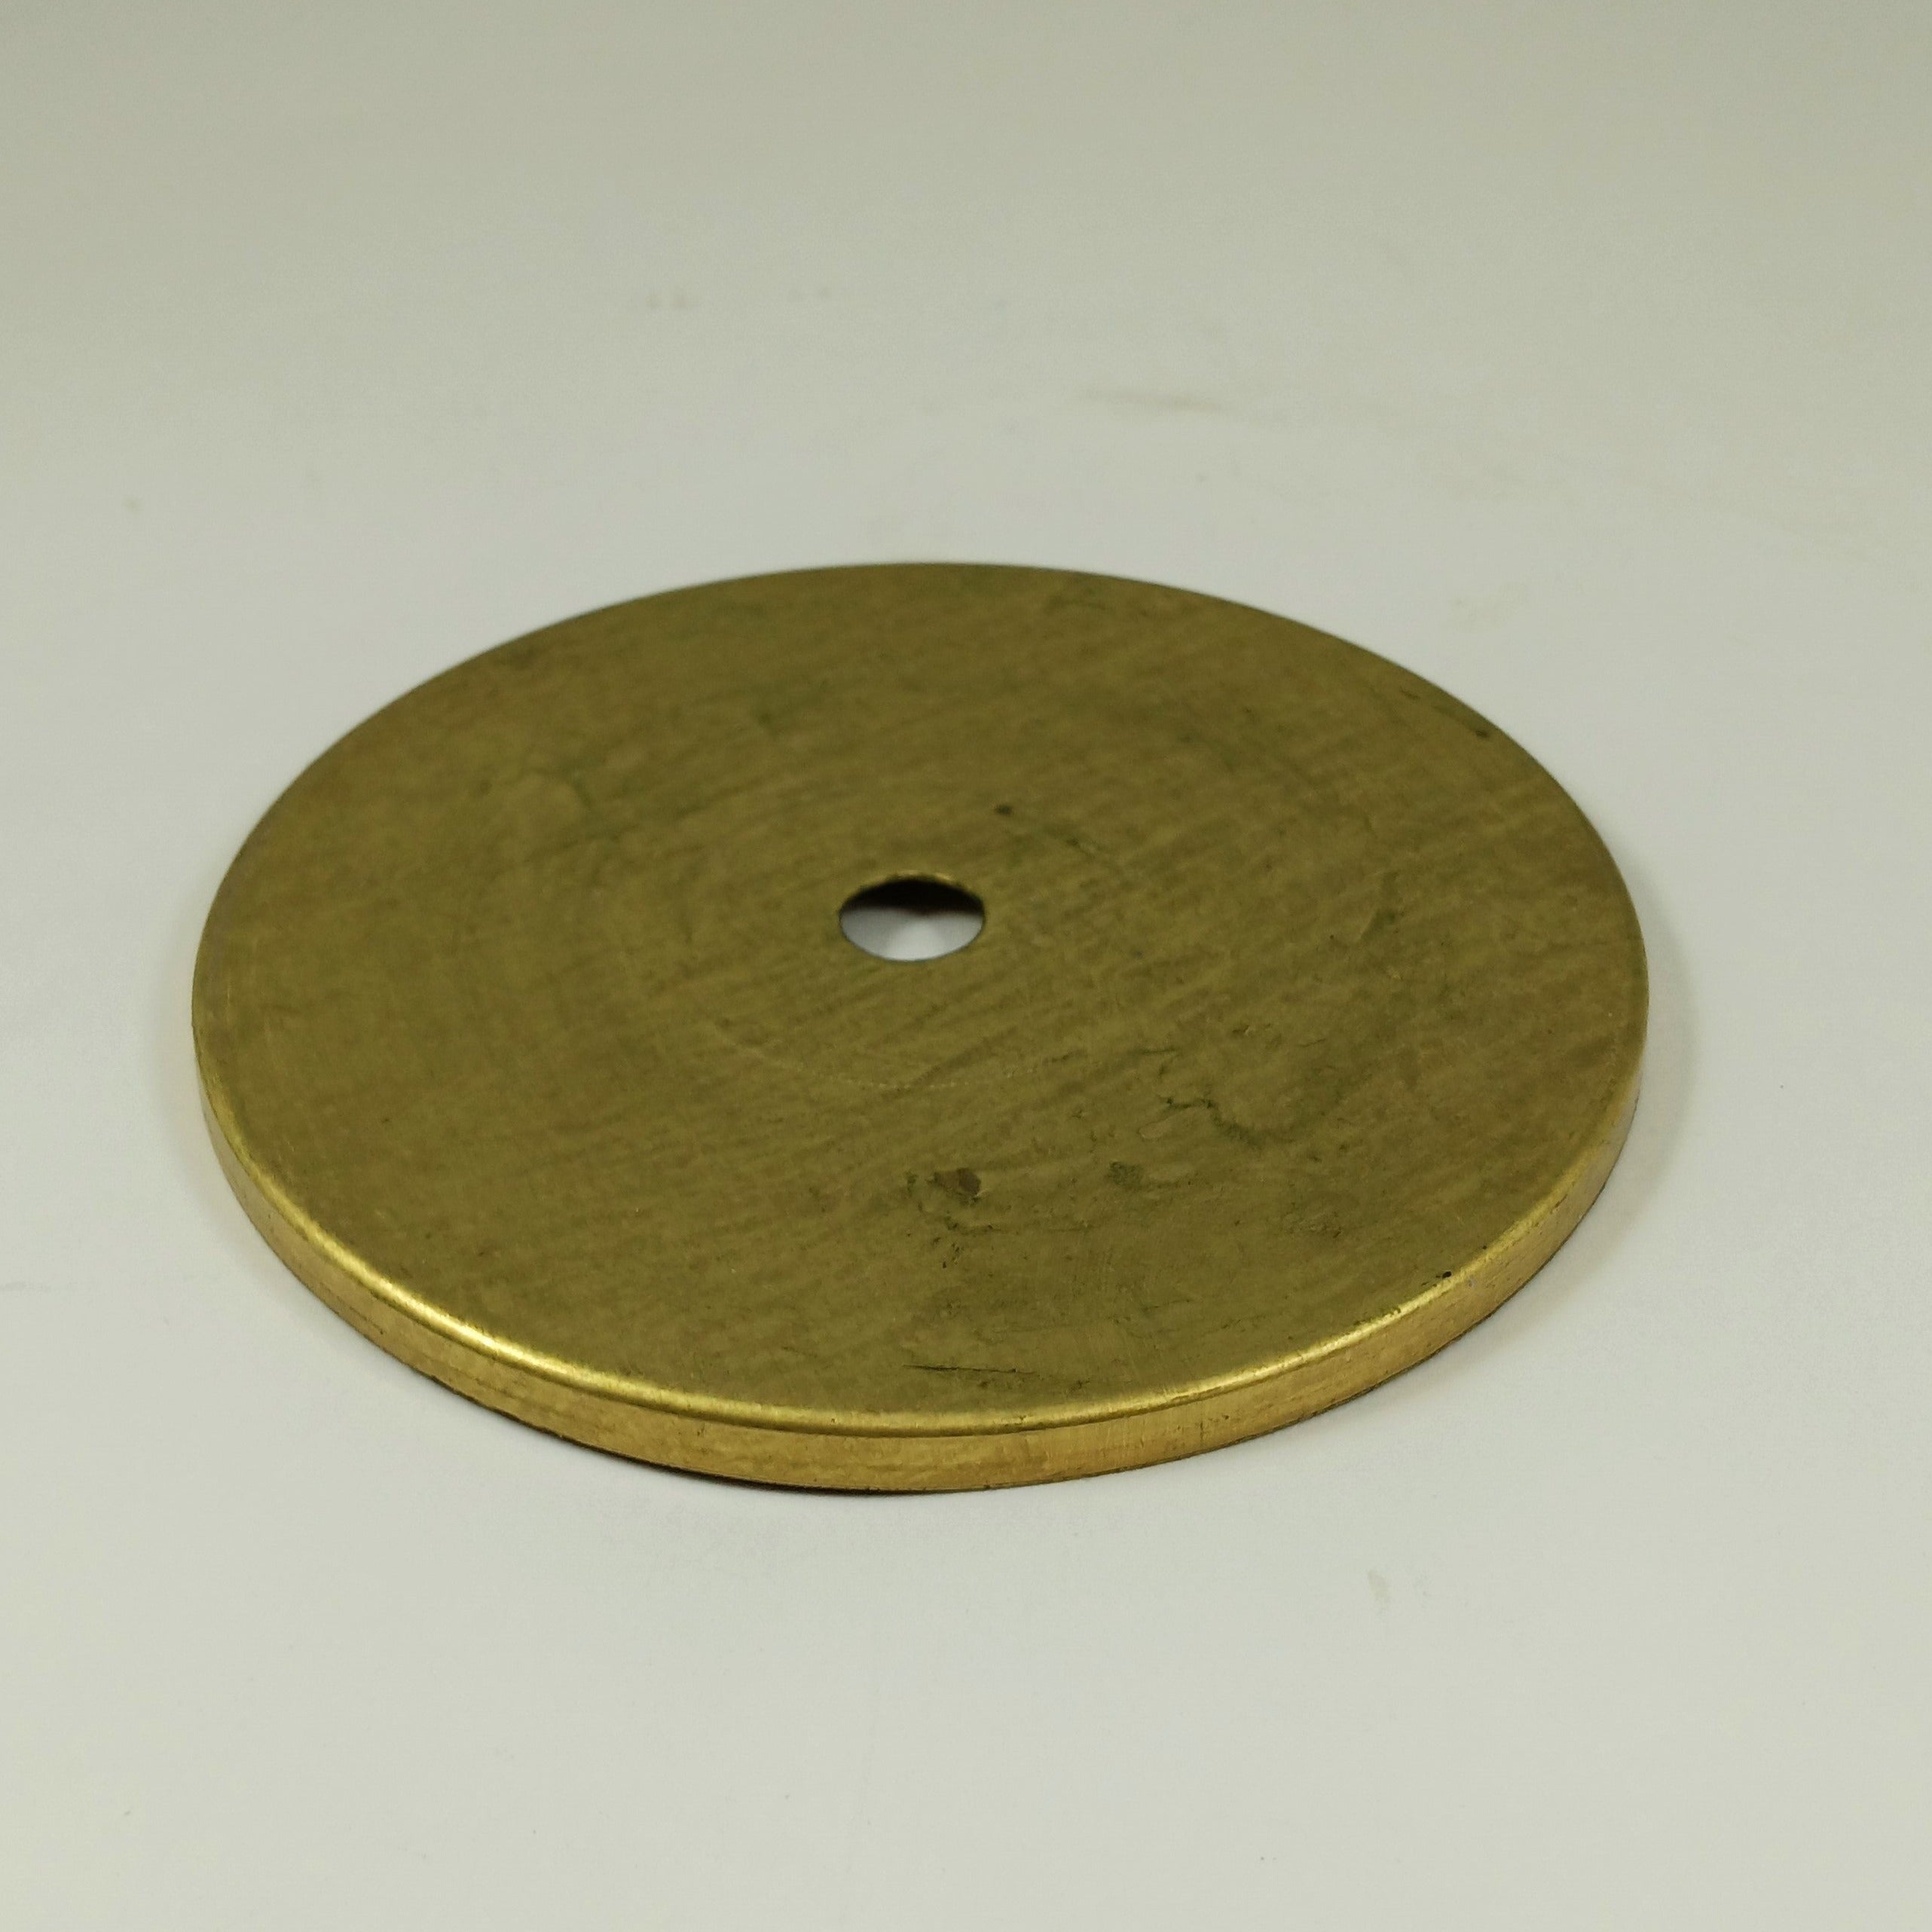 6-1/2" Round Flat Brass Plates - Unfinished Brass - Check Plate